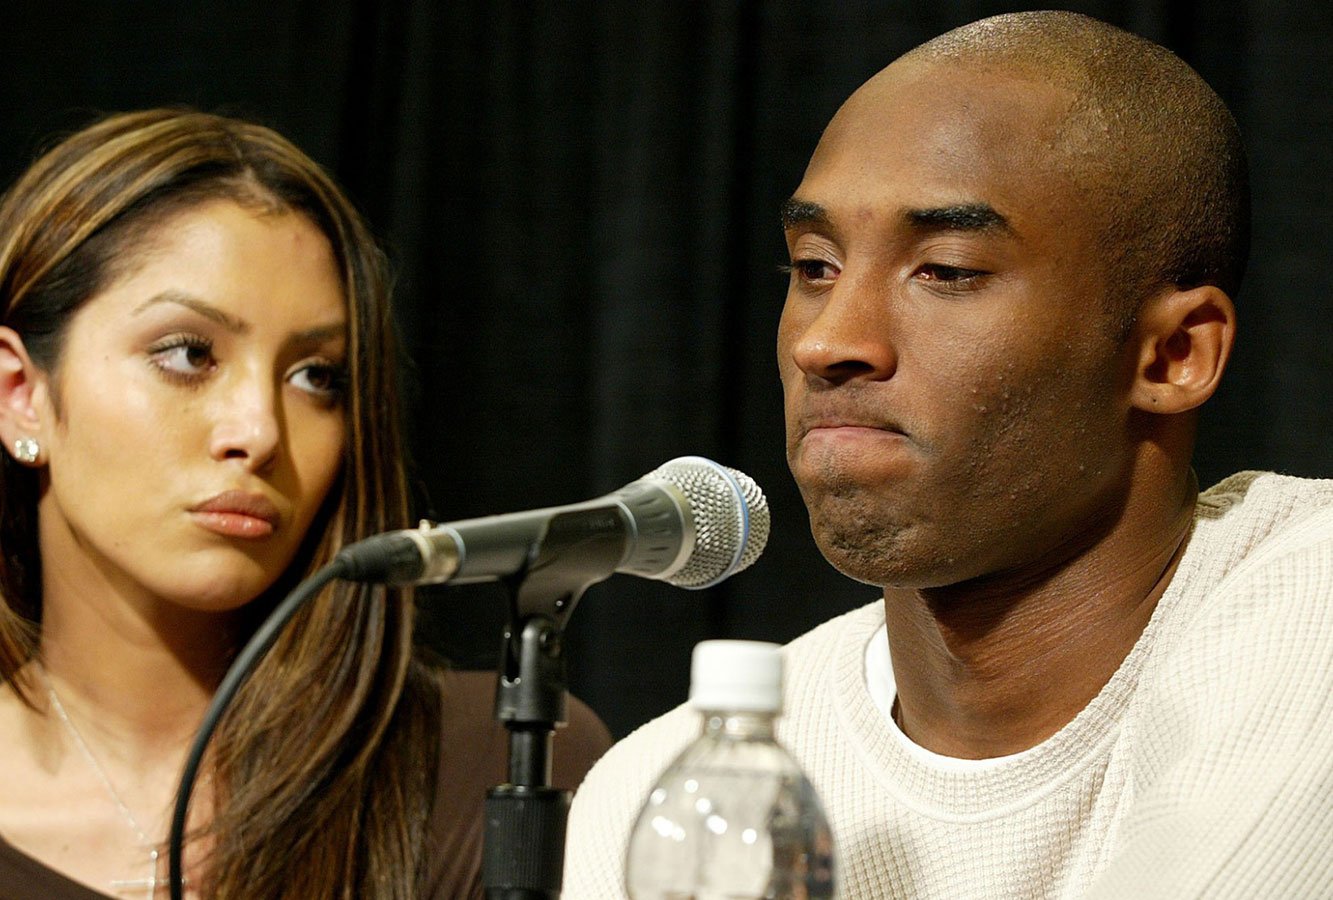 Kobe Bryant with wife, Vanessa at press conference